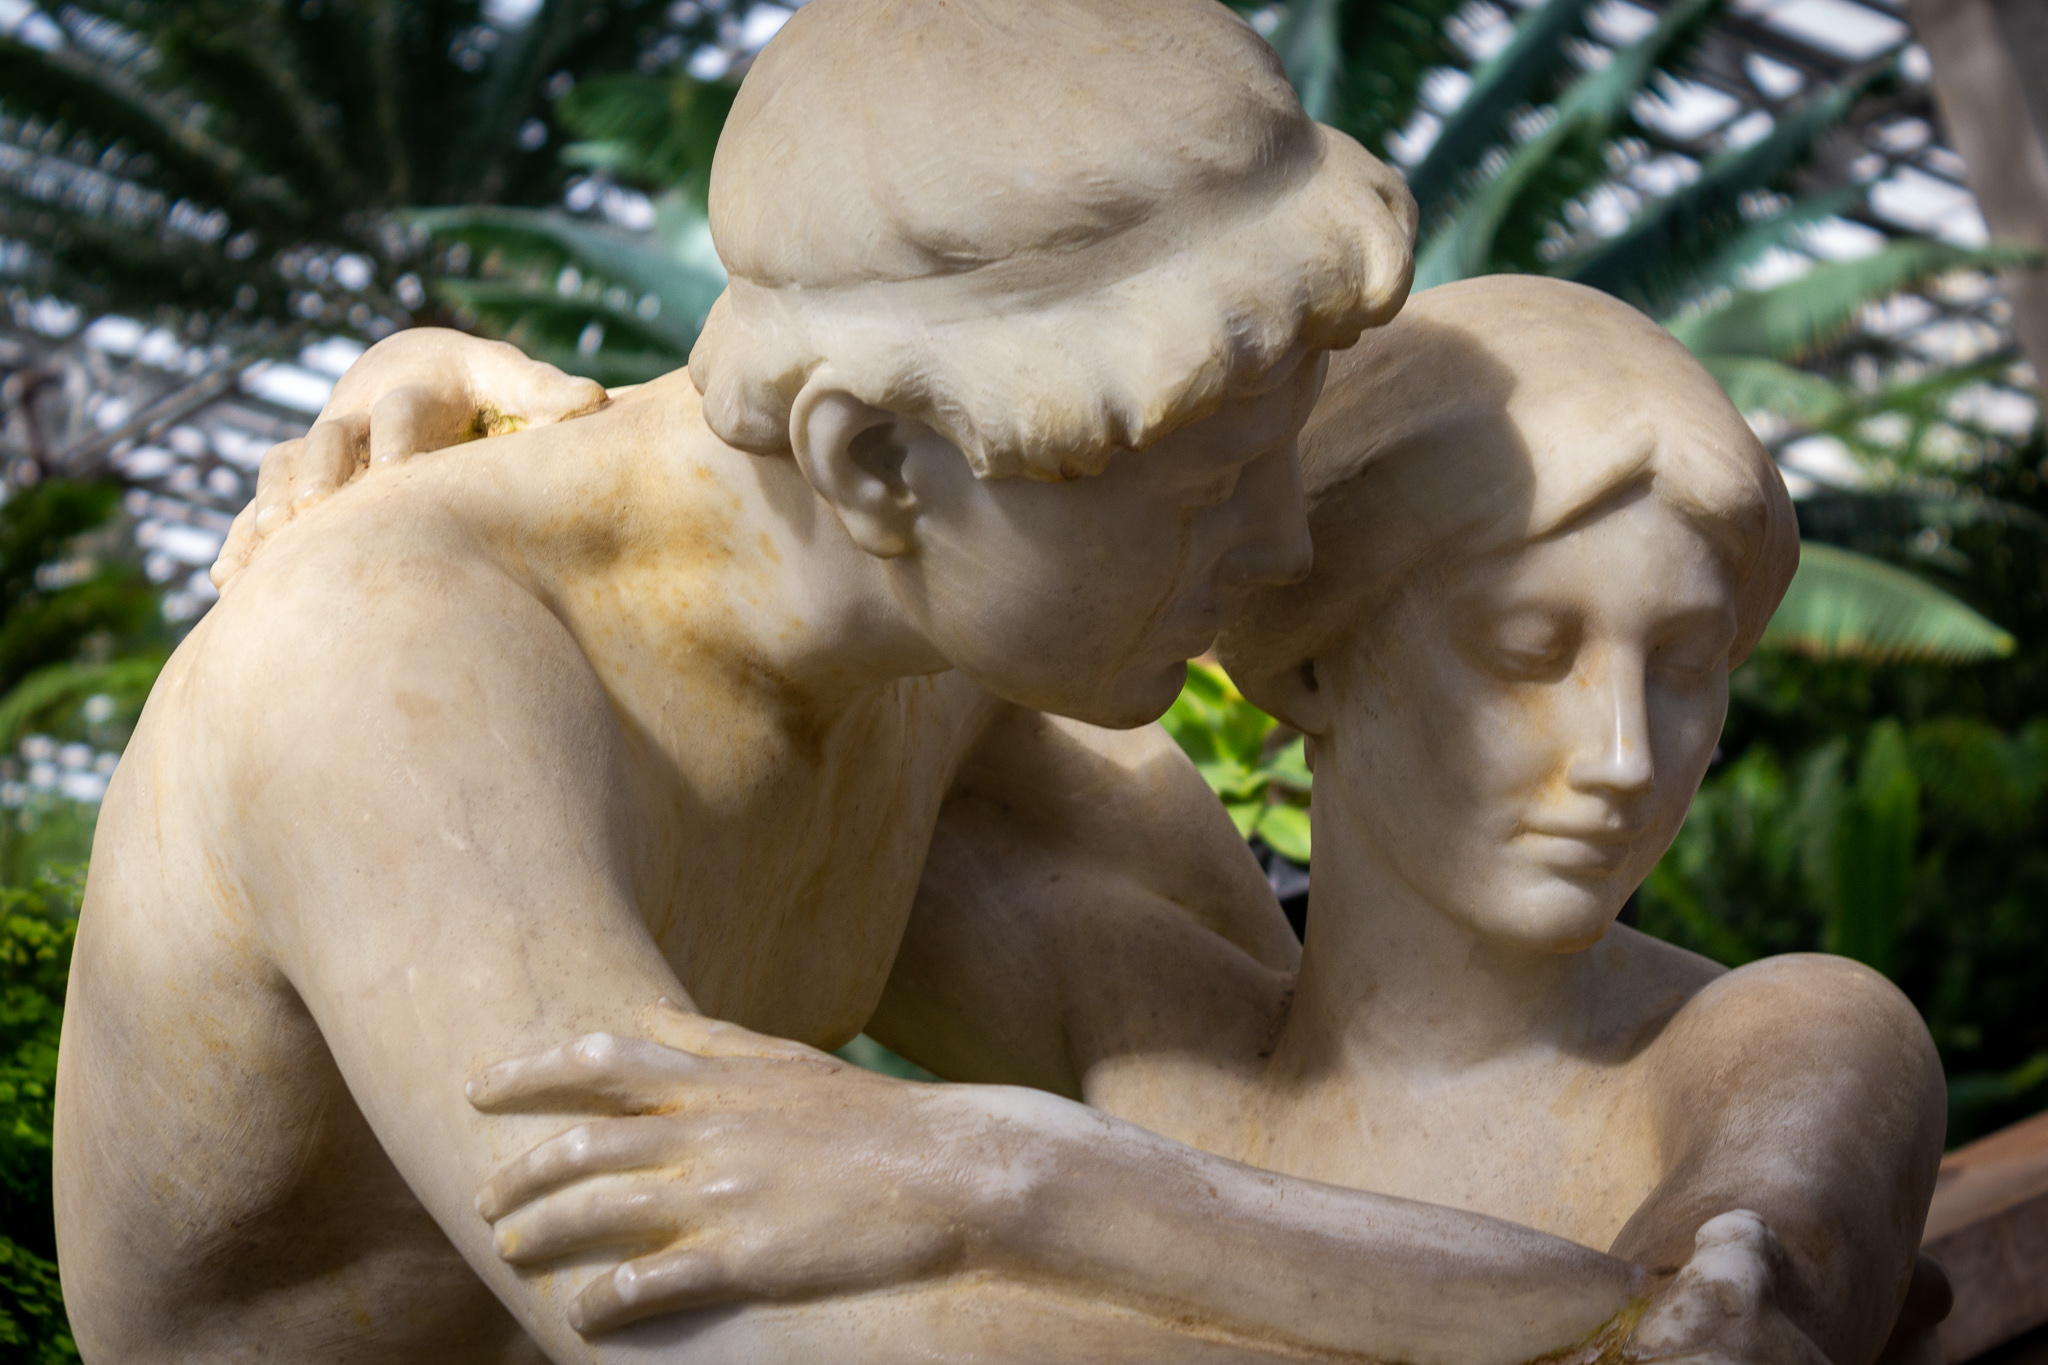 Closeup on a white marble sculpture of a young man embracing a young woman in front of greenery